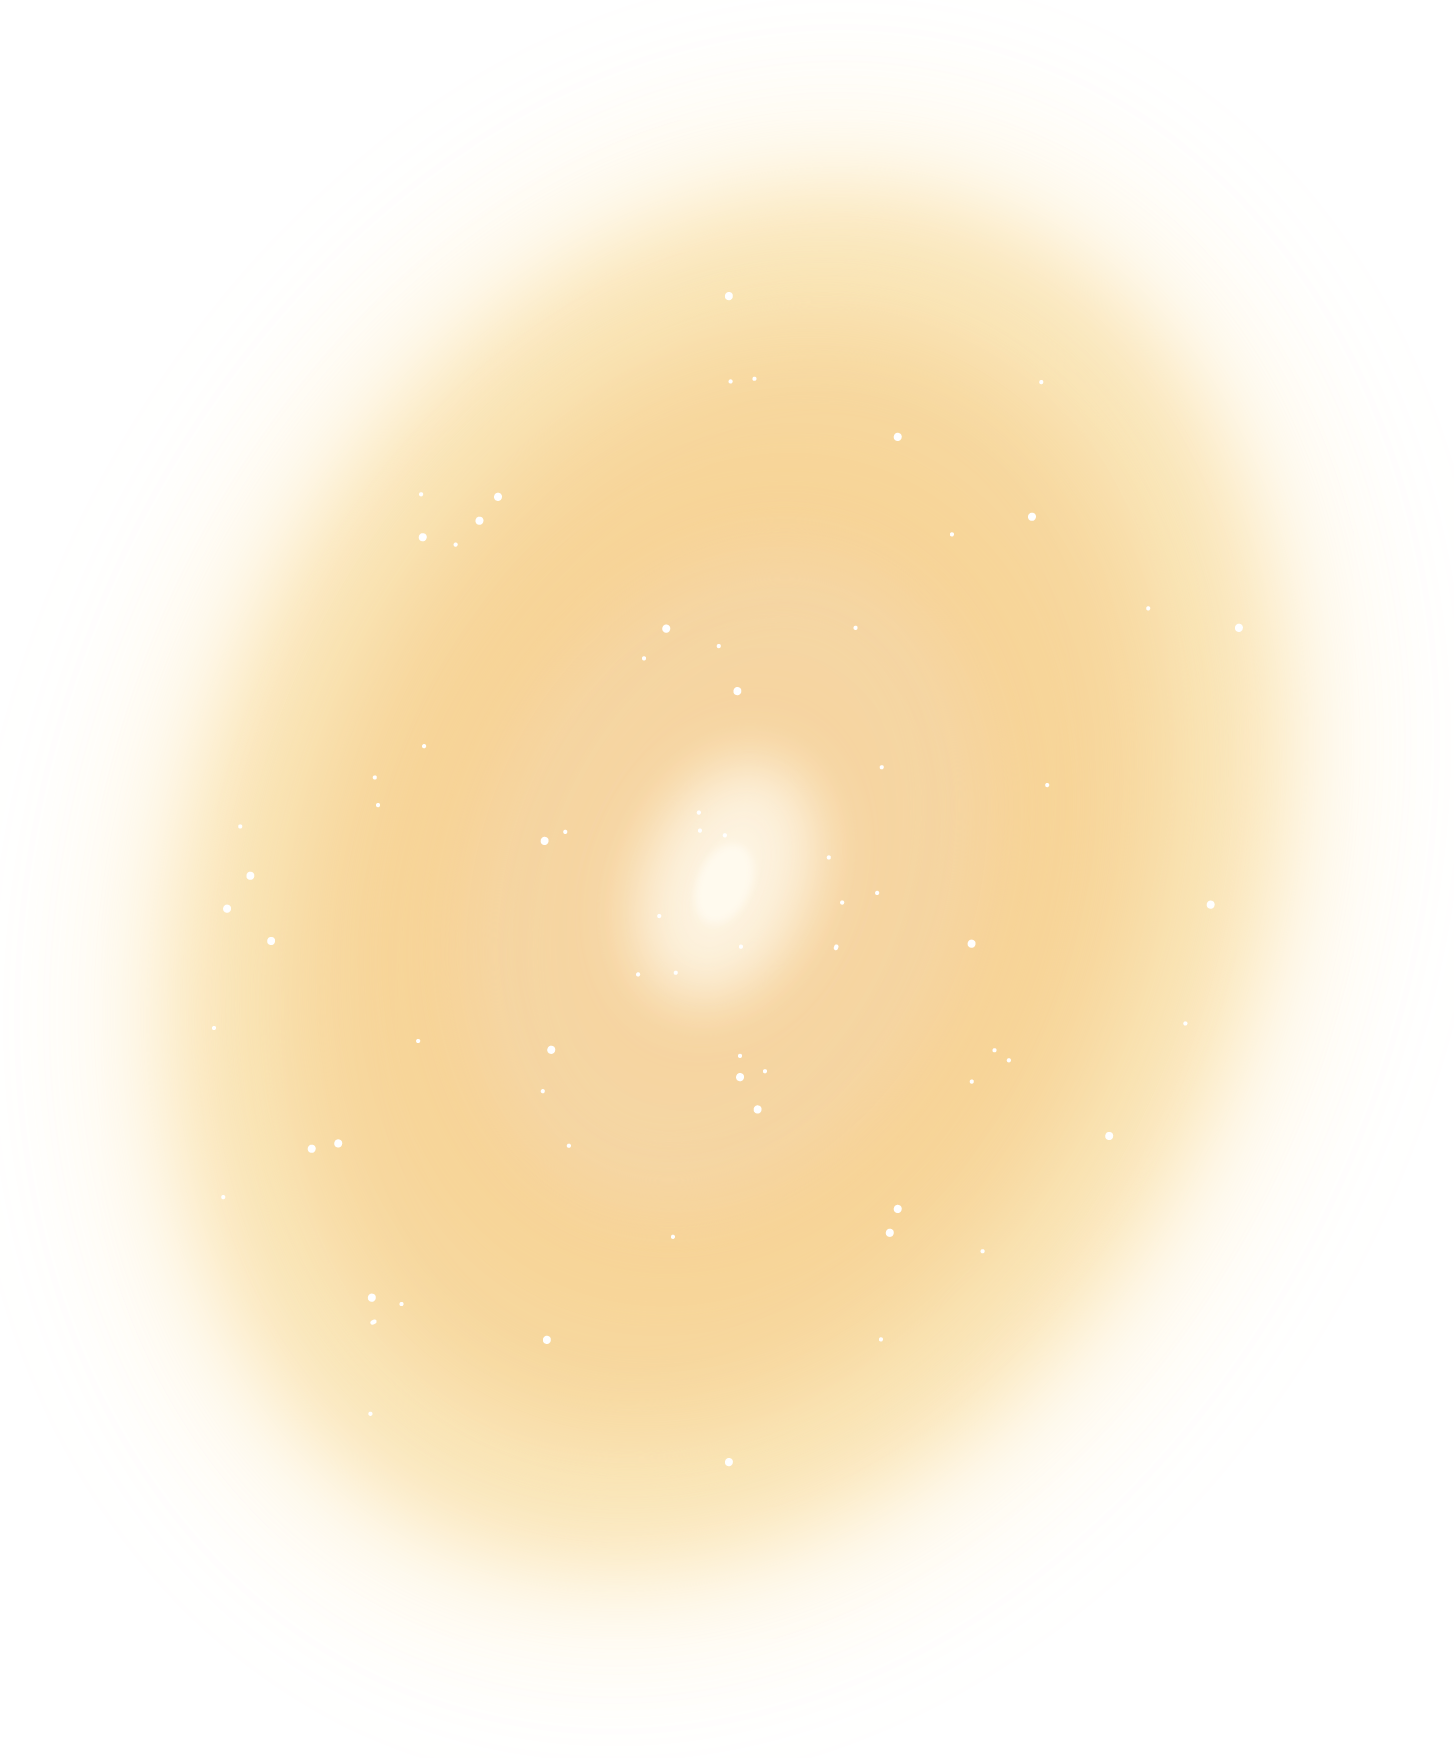 A diffuse oval is outlined by light yellow but gets progressively more opaque moving towards the center, a bright white spot surrounded by a small ring of white haze. White dots representing stars speckle the image.